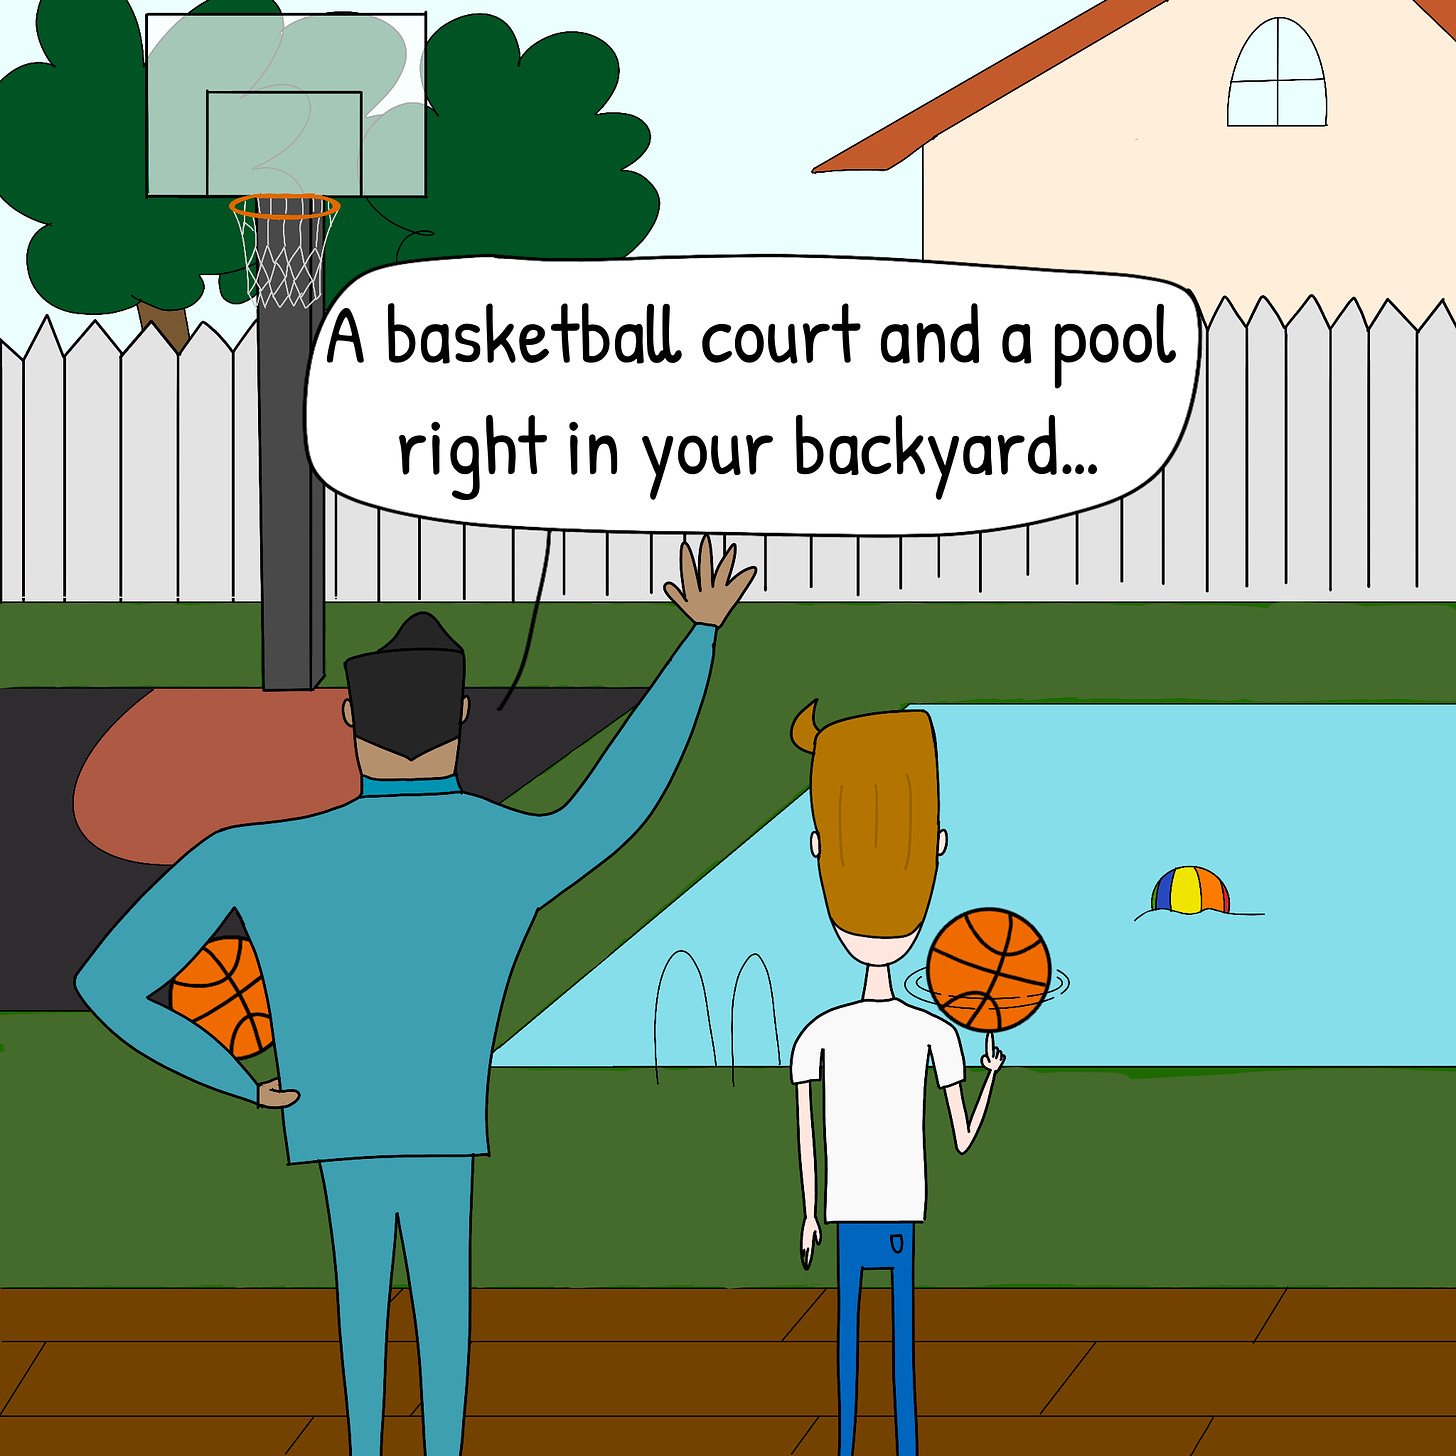 Panel 3: The realtor shows Vic the backyard and continues by saying "A basketball court and a pool right in your backyard..."